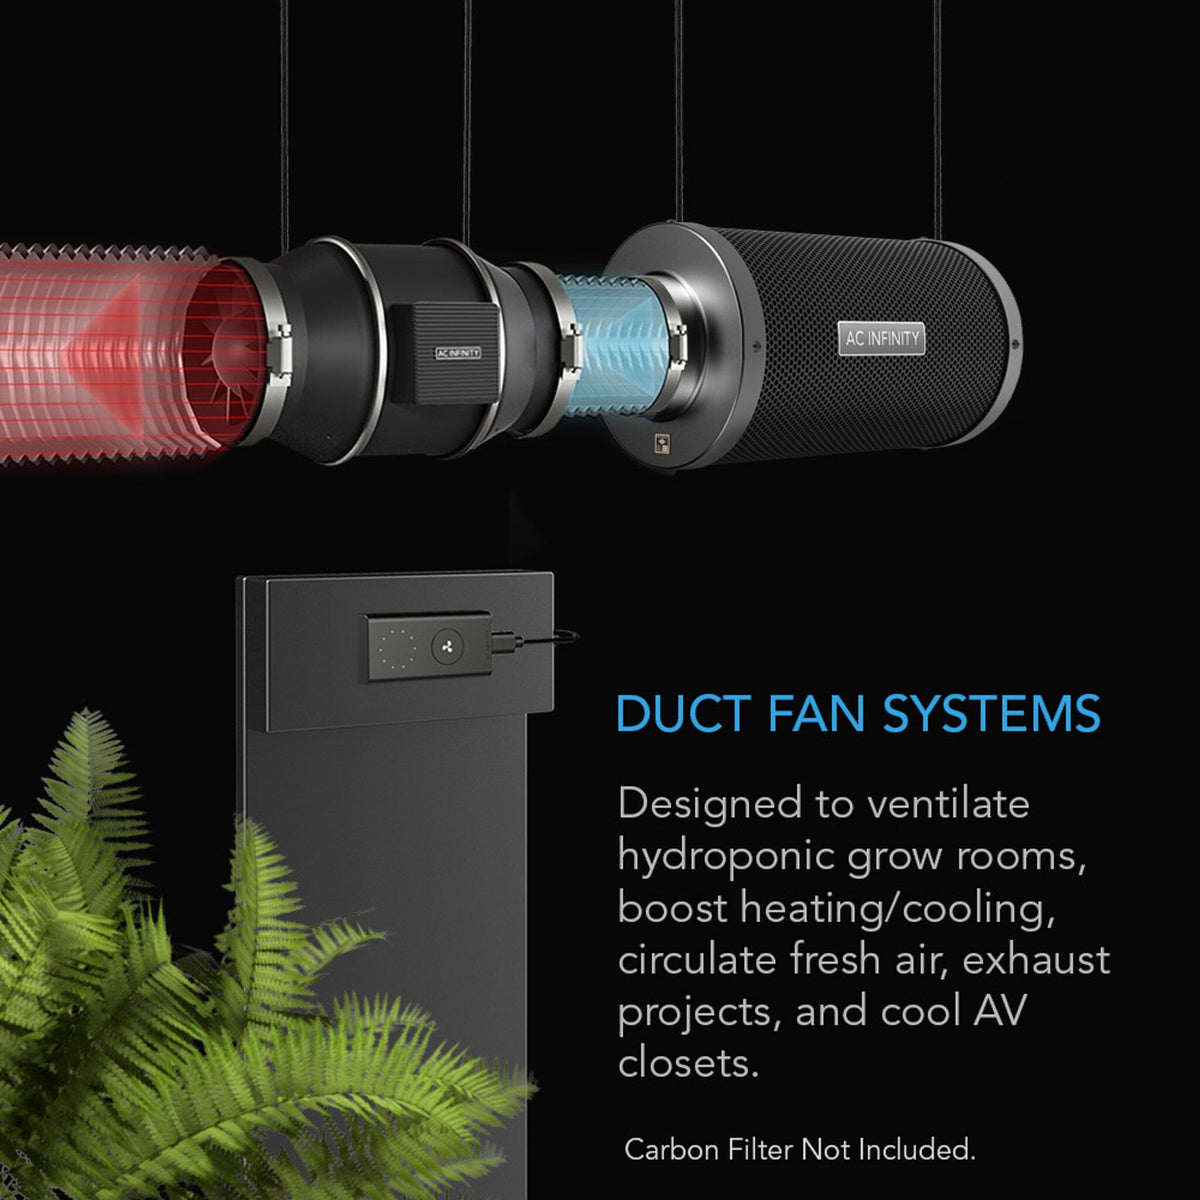 Duct fan system for ventilating grow rooms and other projects